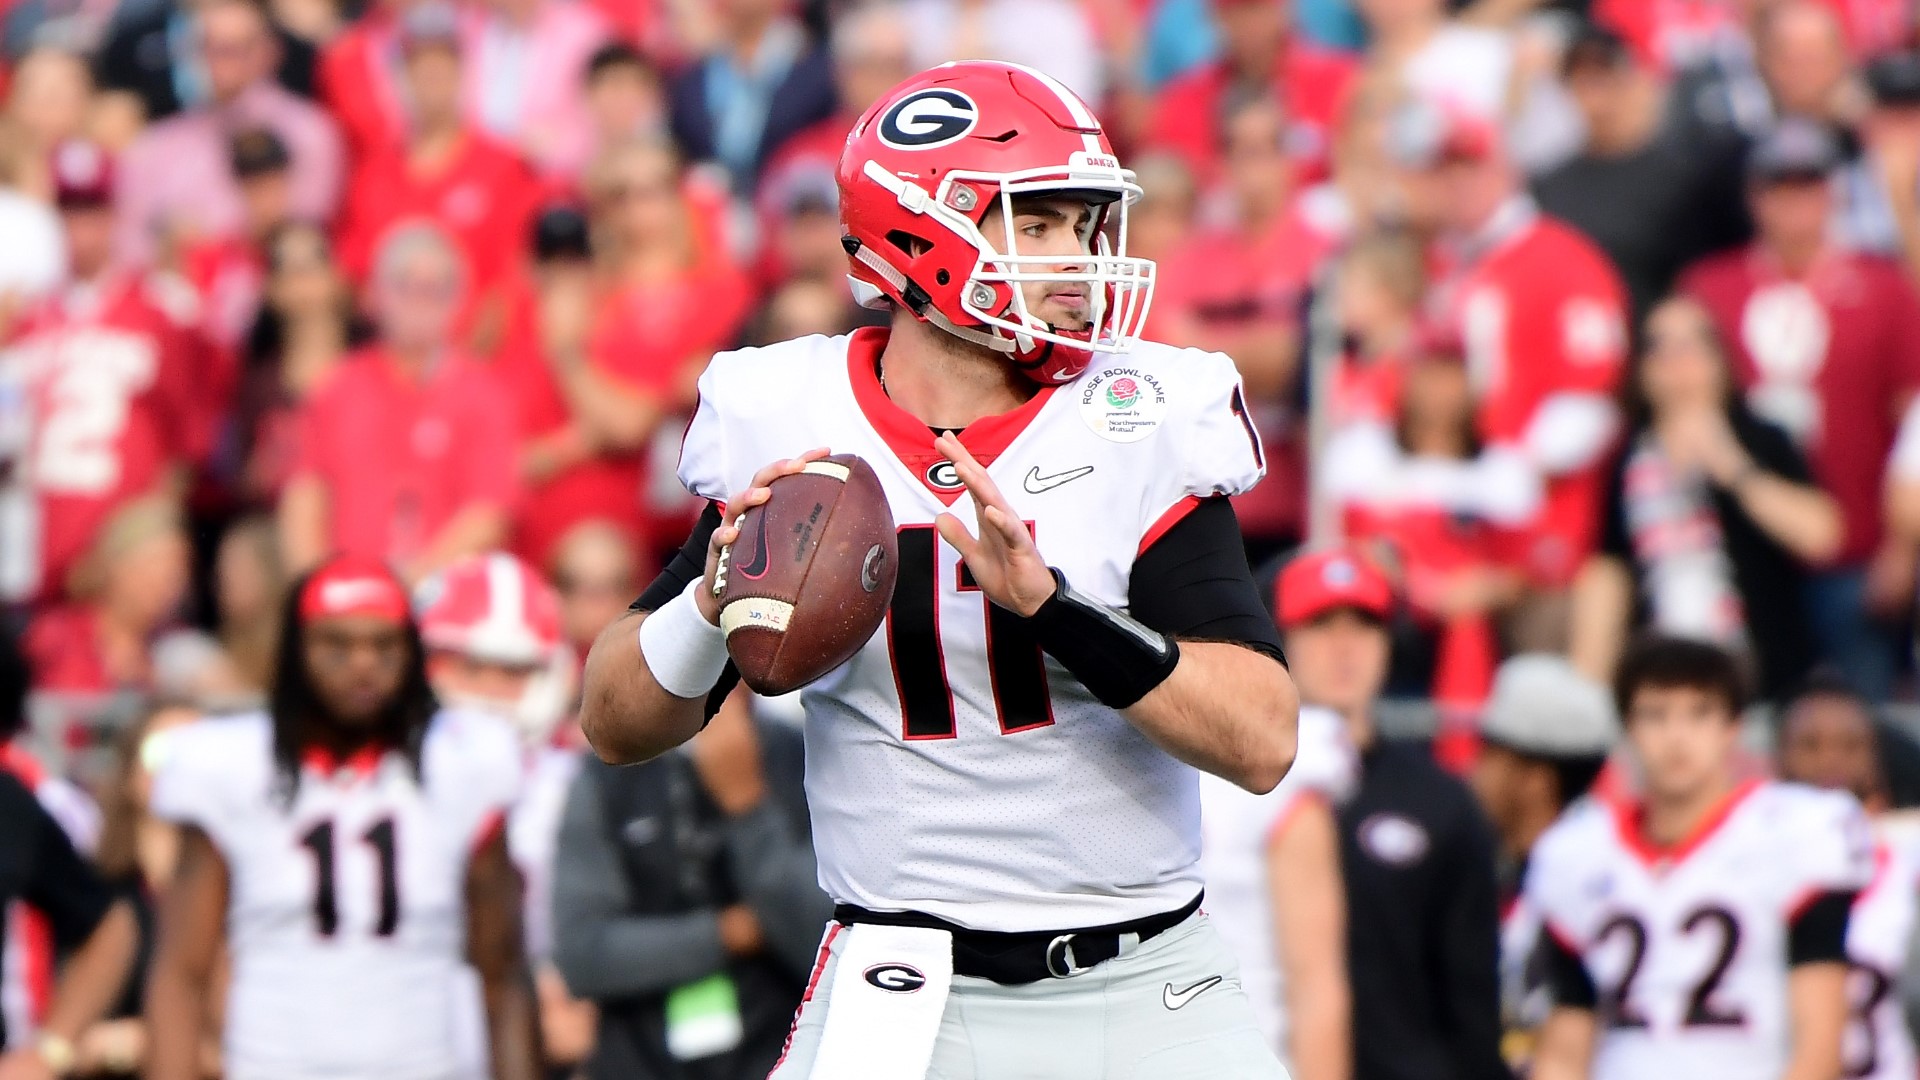 Georgia is out to prove it would have been a better selection for the College Football Playoff, even after losing to Alabama in the SEC championship game.